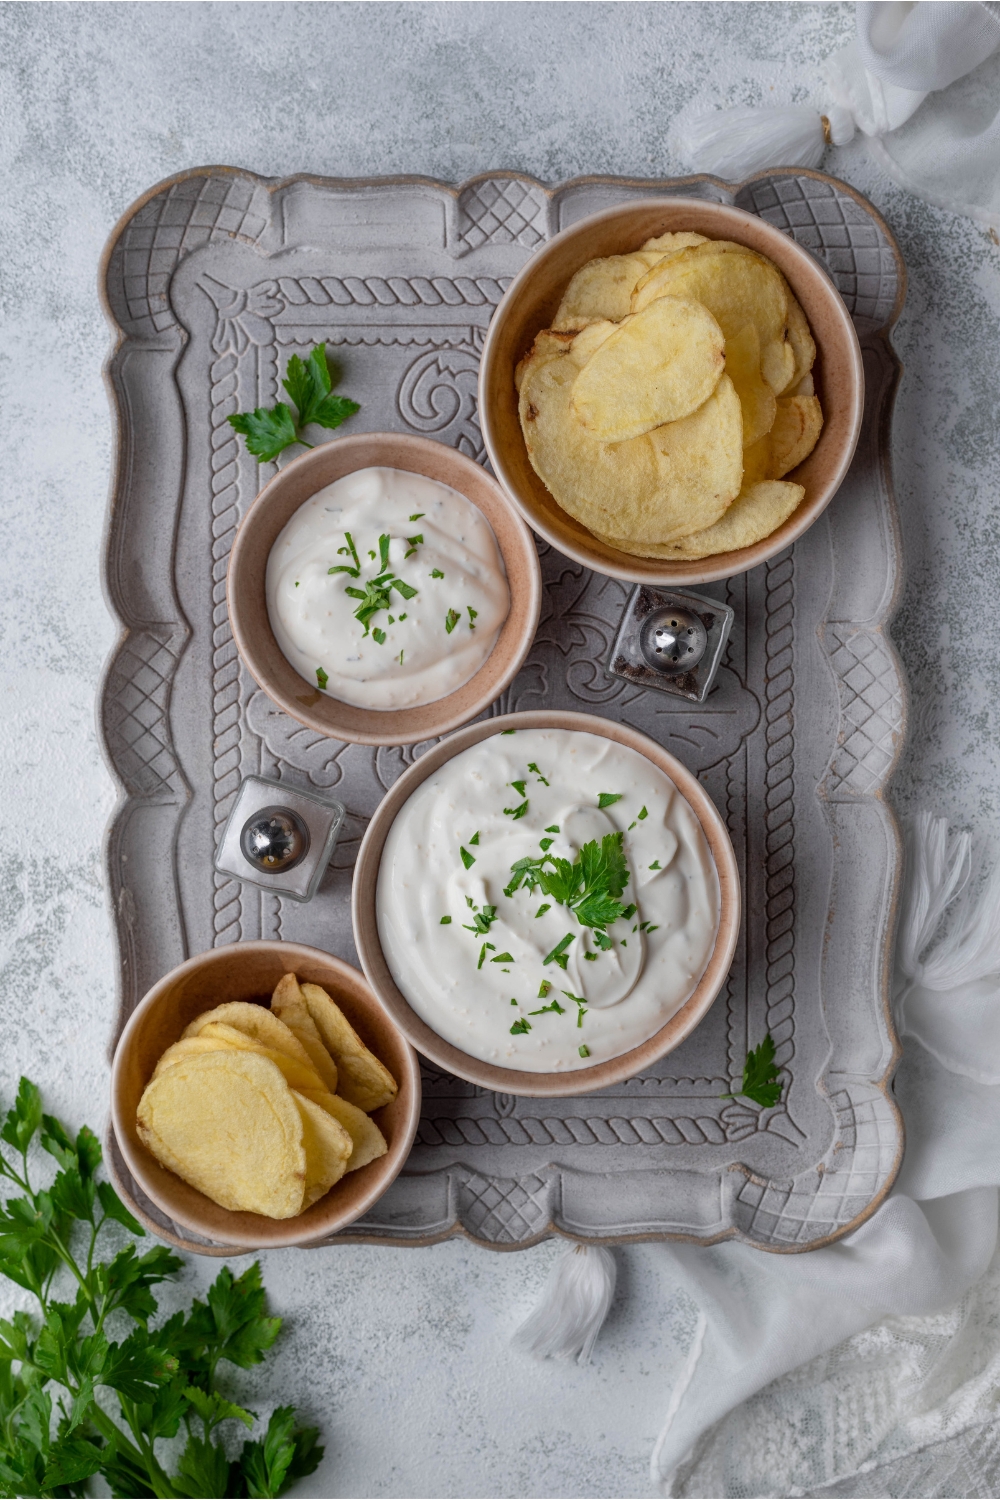 Overview of two bowls of sour cream dip and two bowls of chips on a decorative grey tray. There's fresh herbs garnished on the dip and sprinkled on the tray alongside a set of salt and pepper shakers.